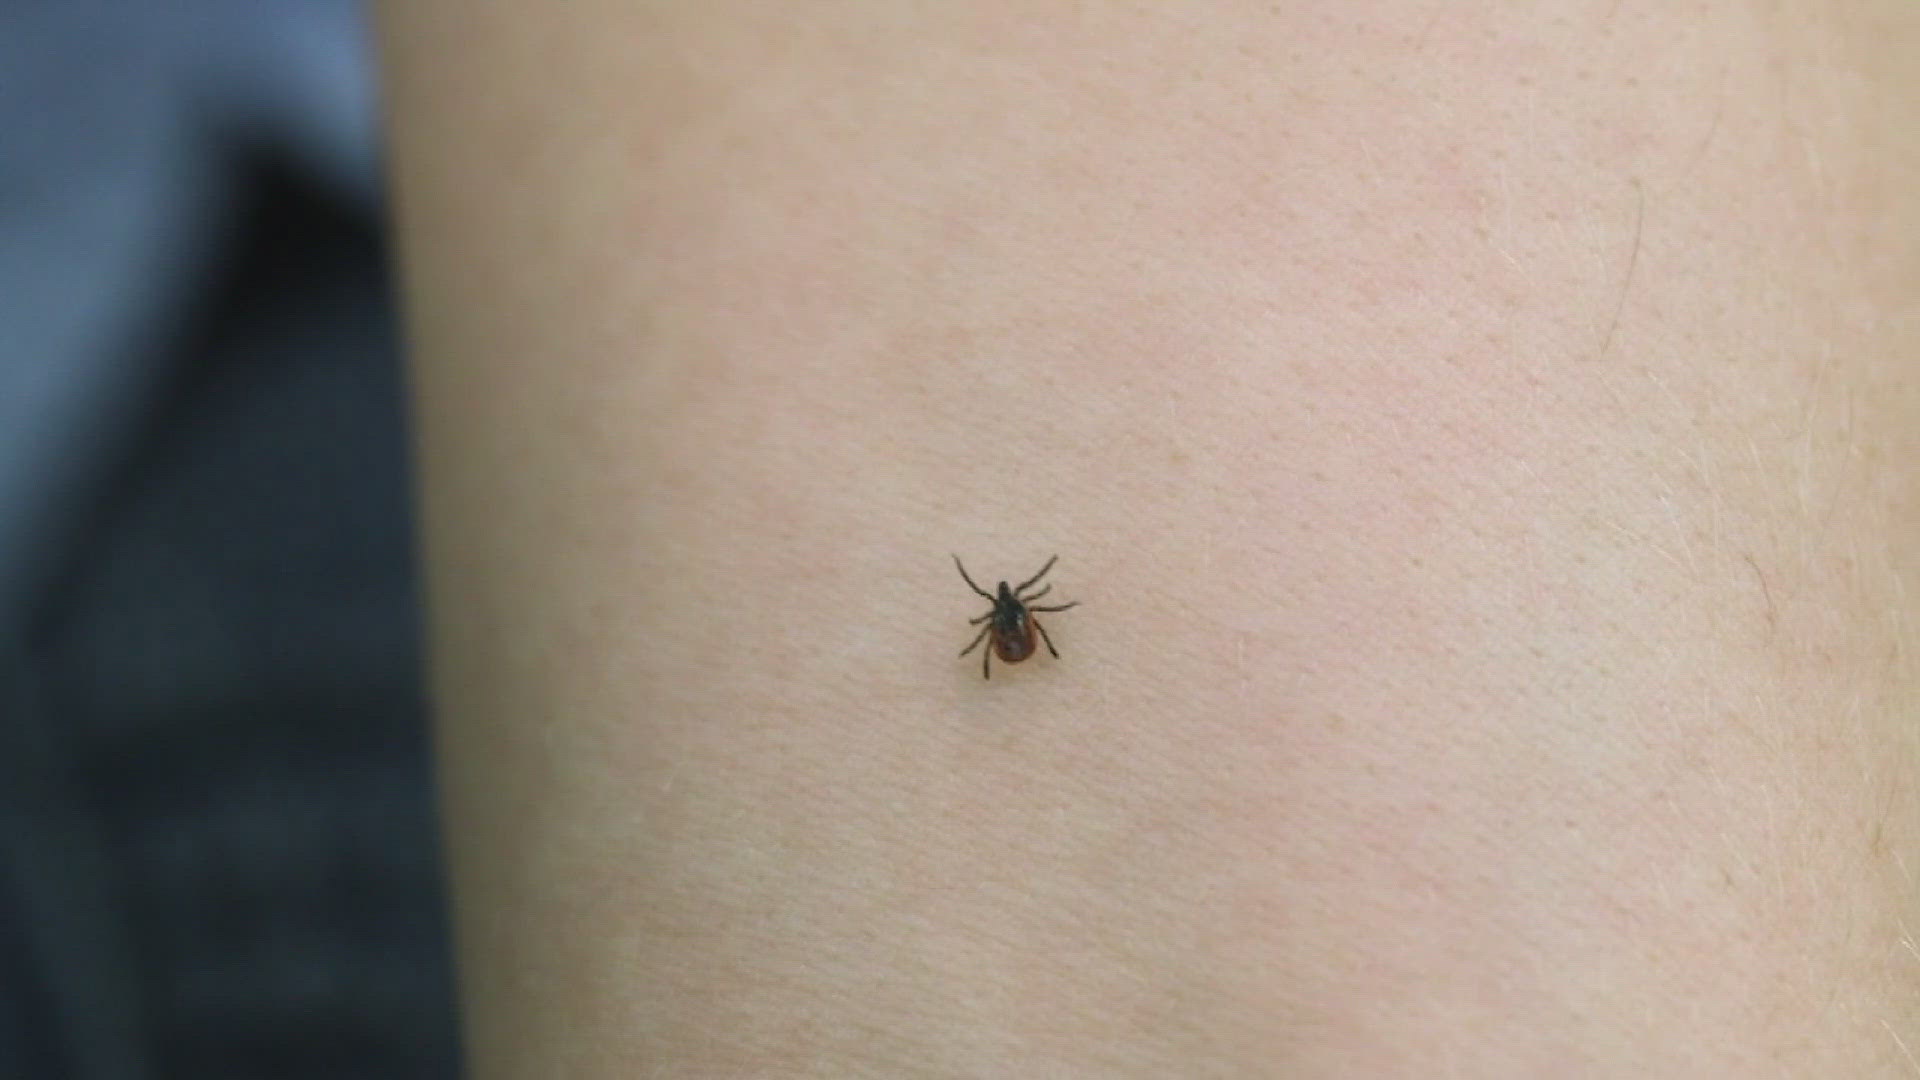 Warmer weather is moving in, but so are the ticks. Consumer Reports looks at chemical-free ways to limit the amount of ticks making your backyard home.